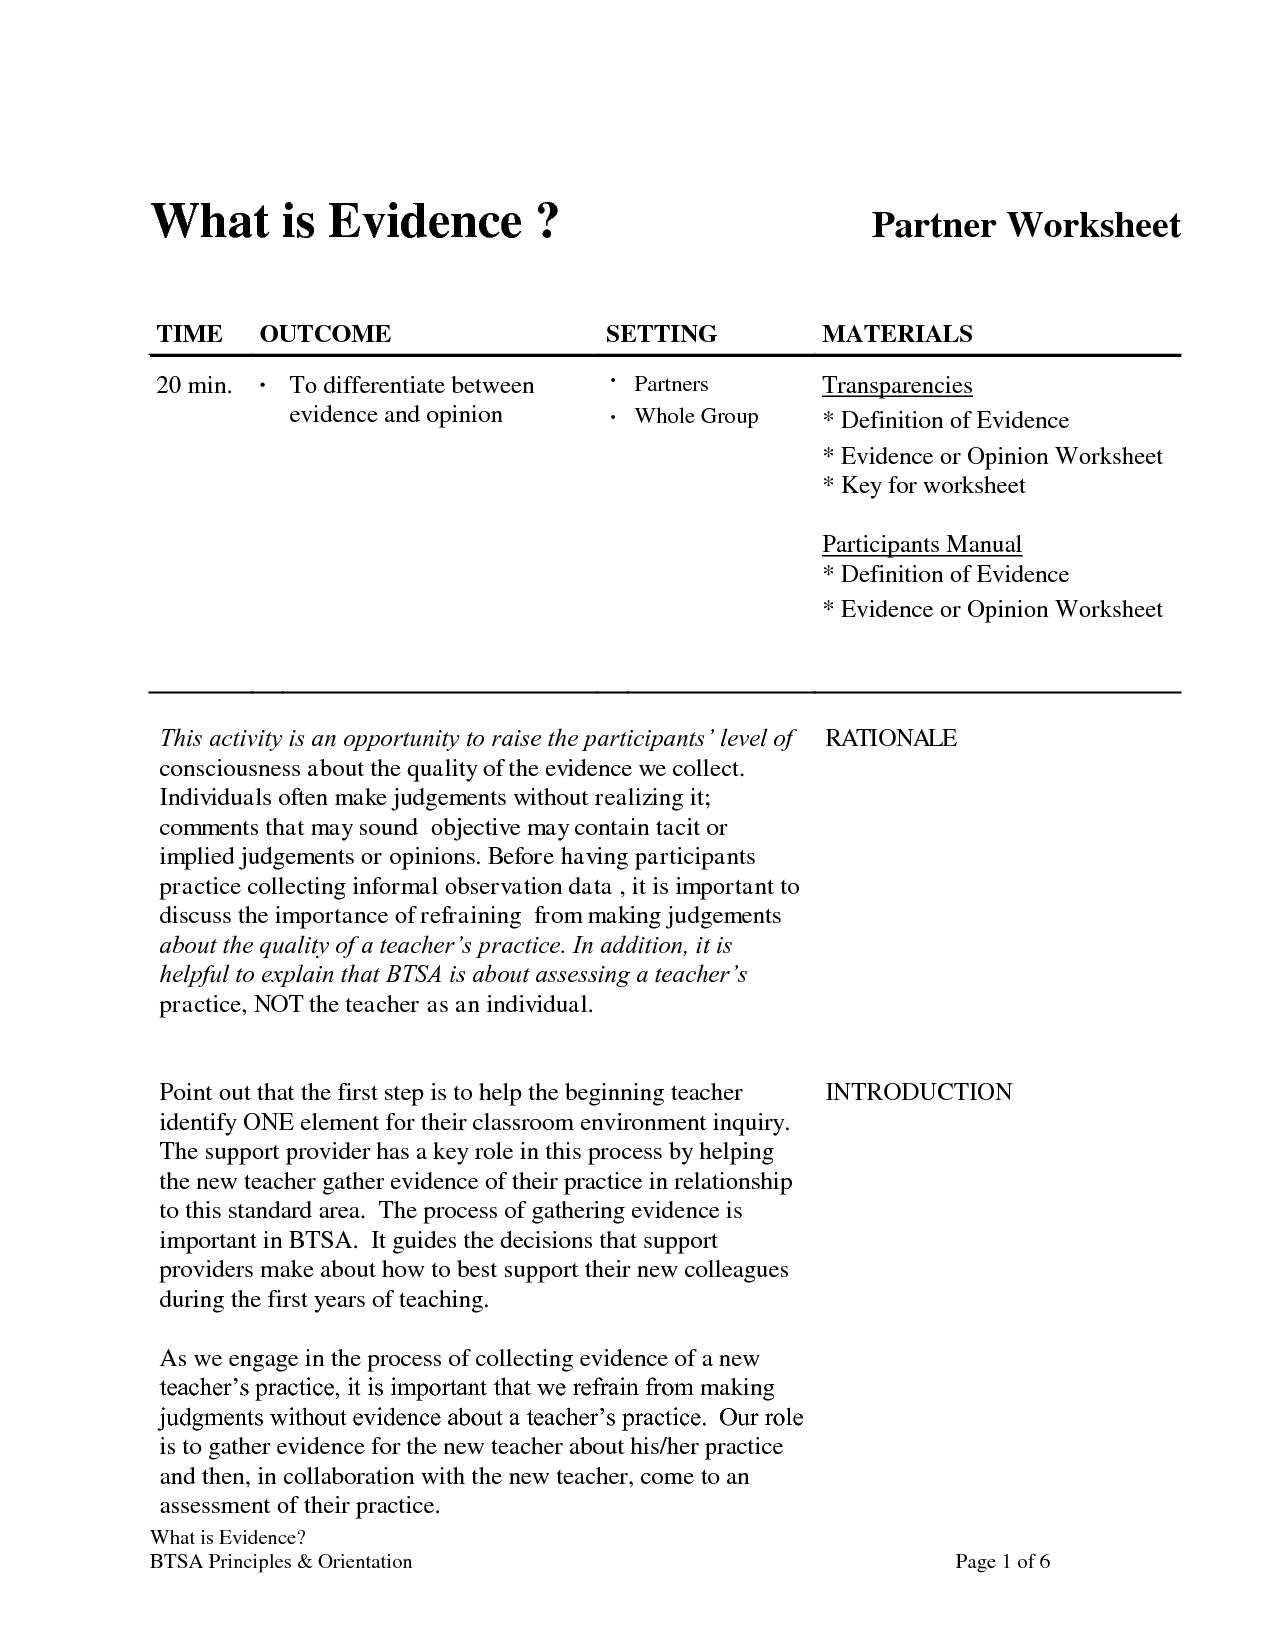 Drawing Inferences Worksheets Image